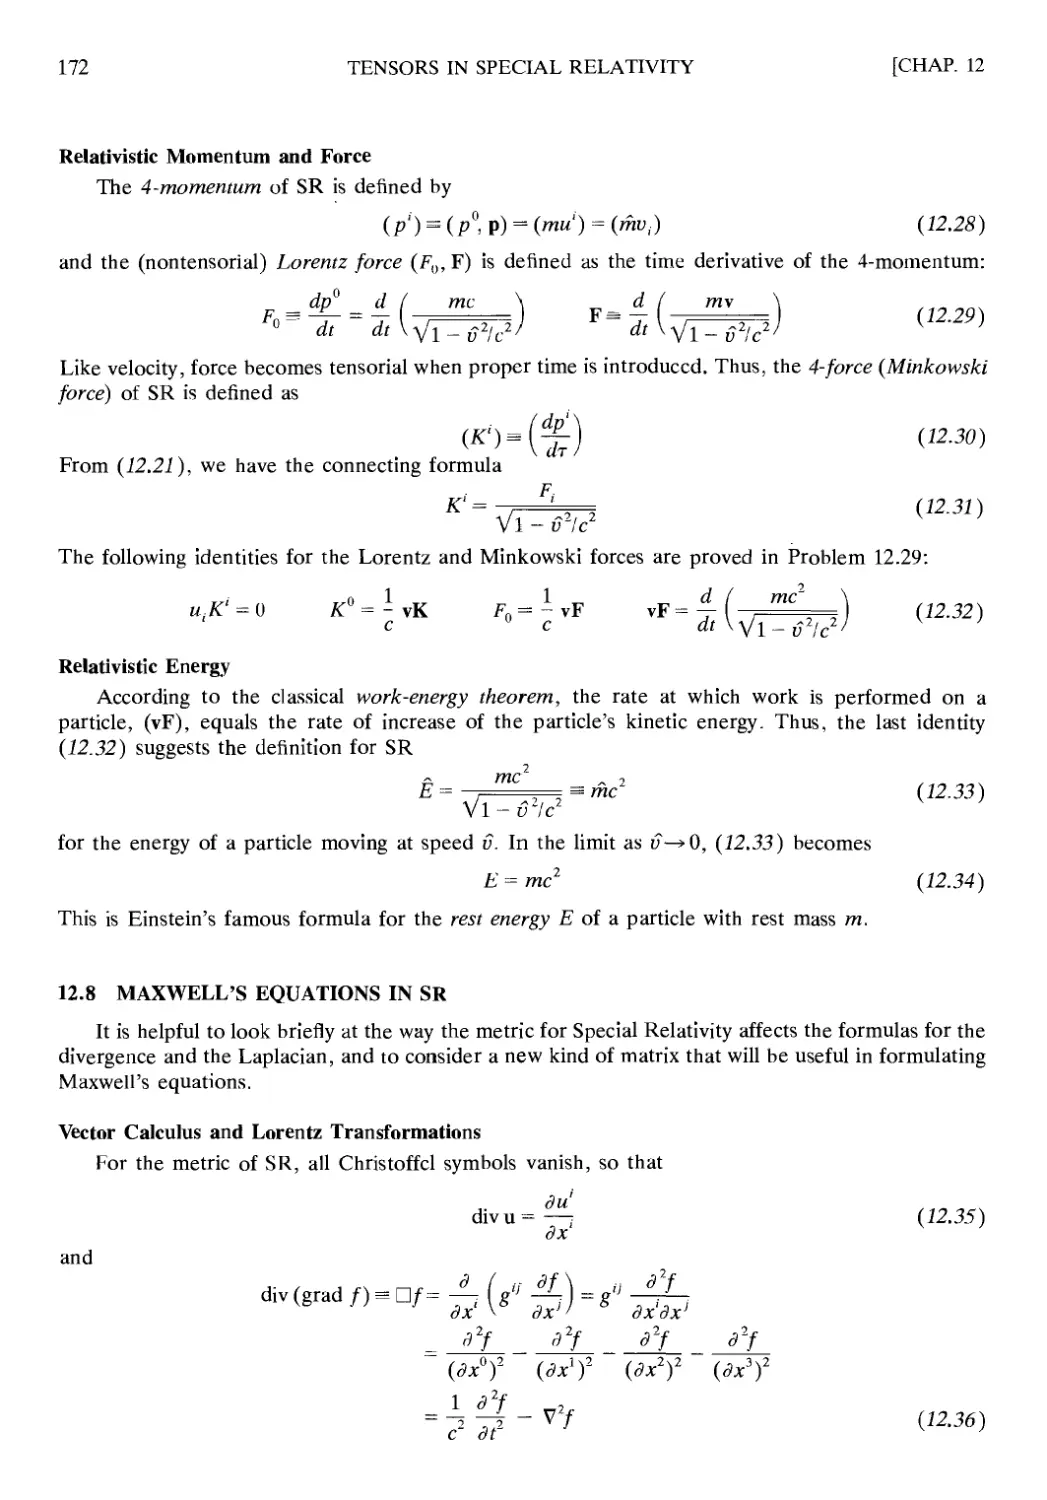 12.8 Maxwell's Equations in SR